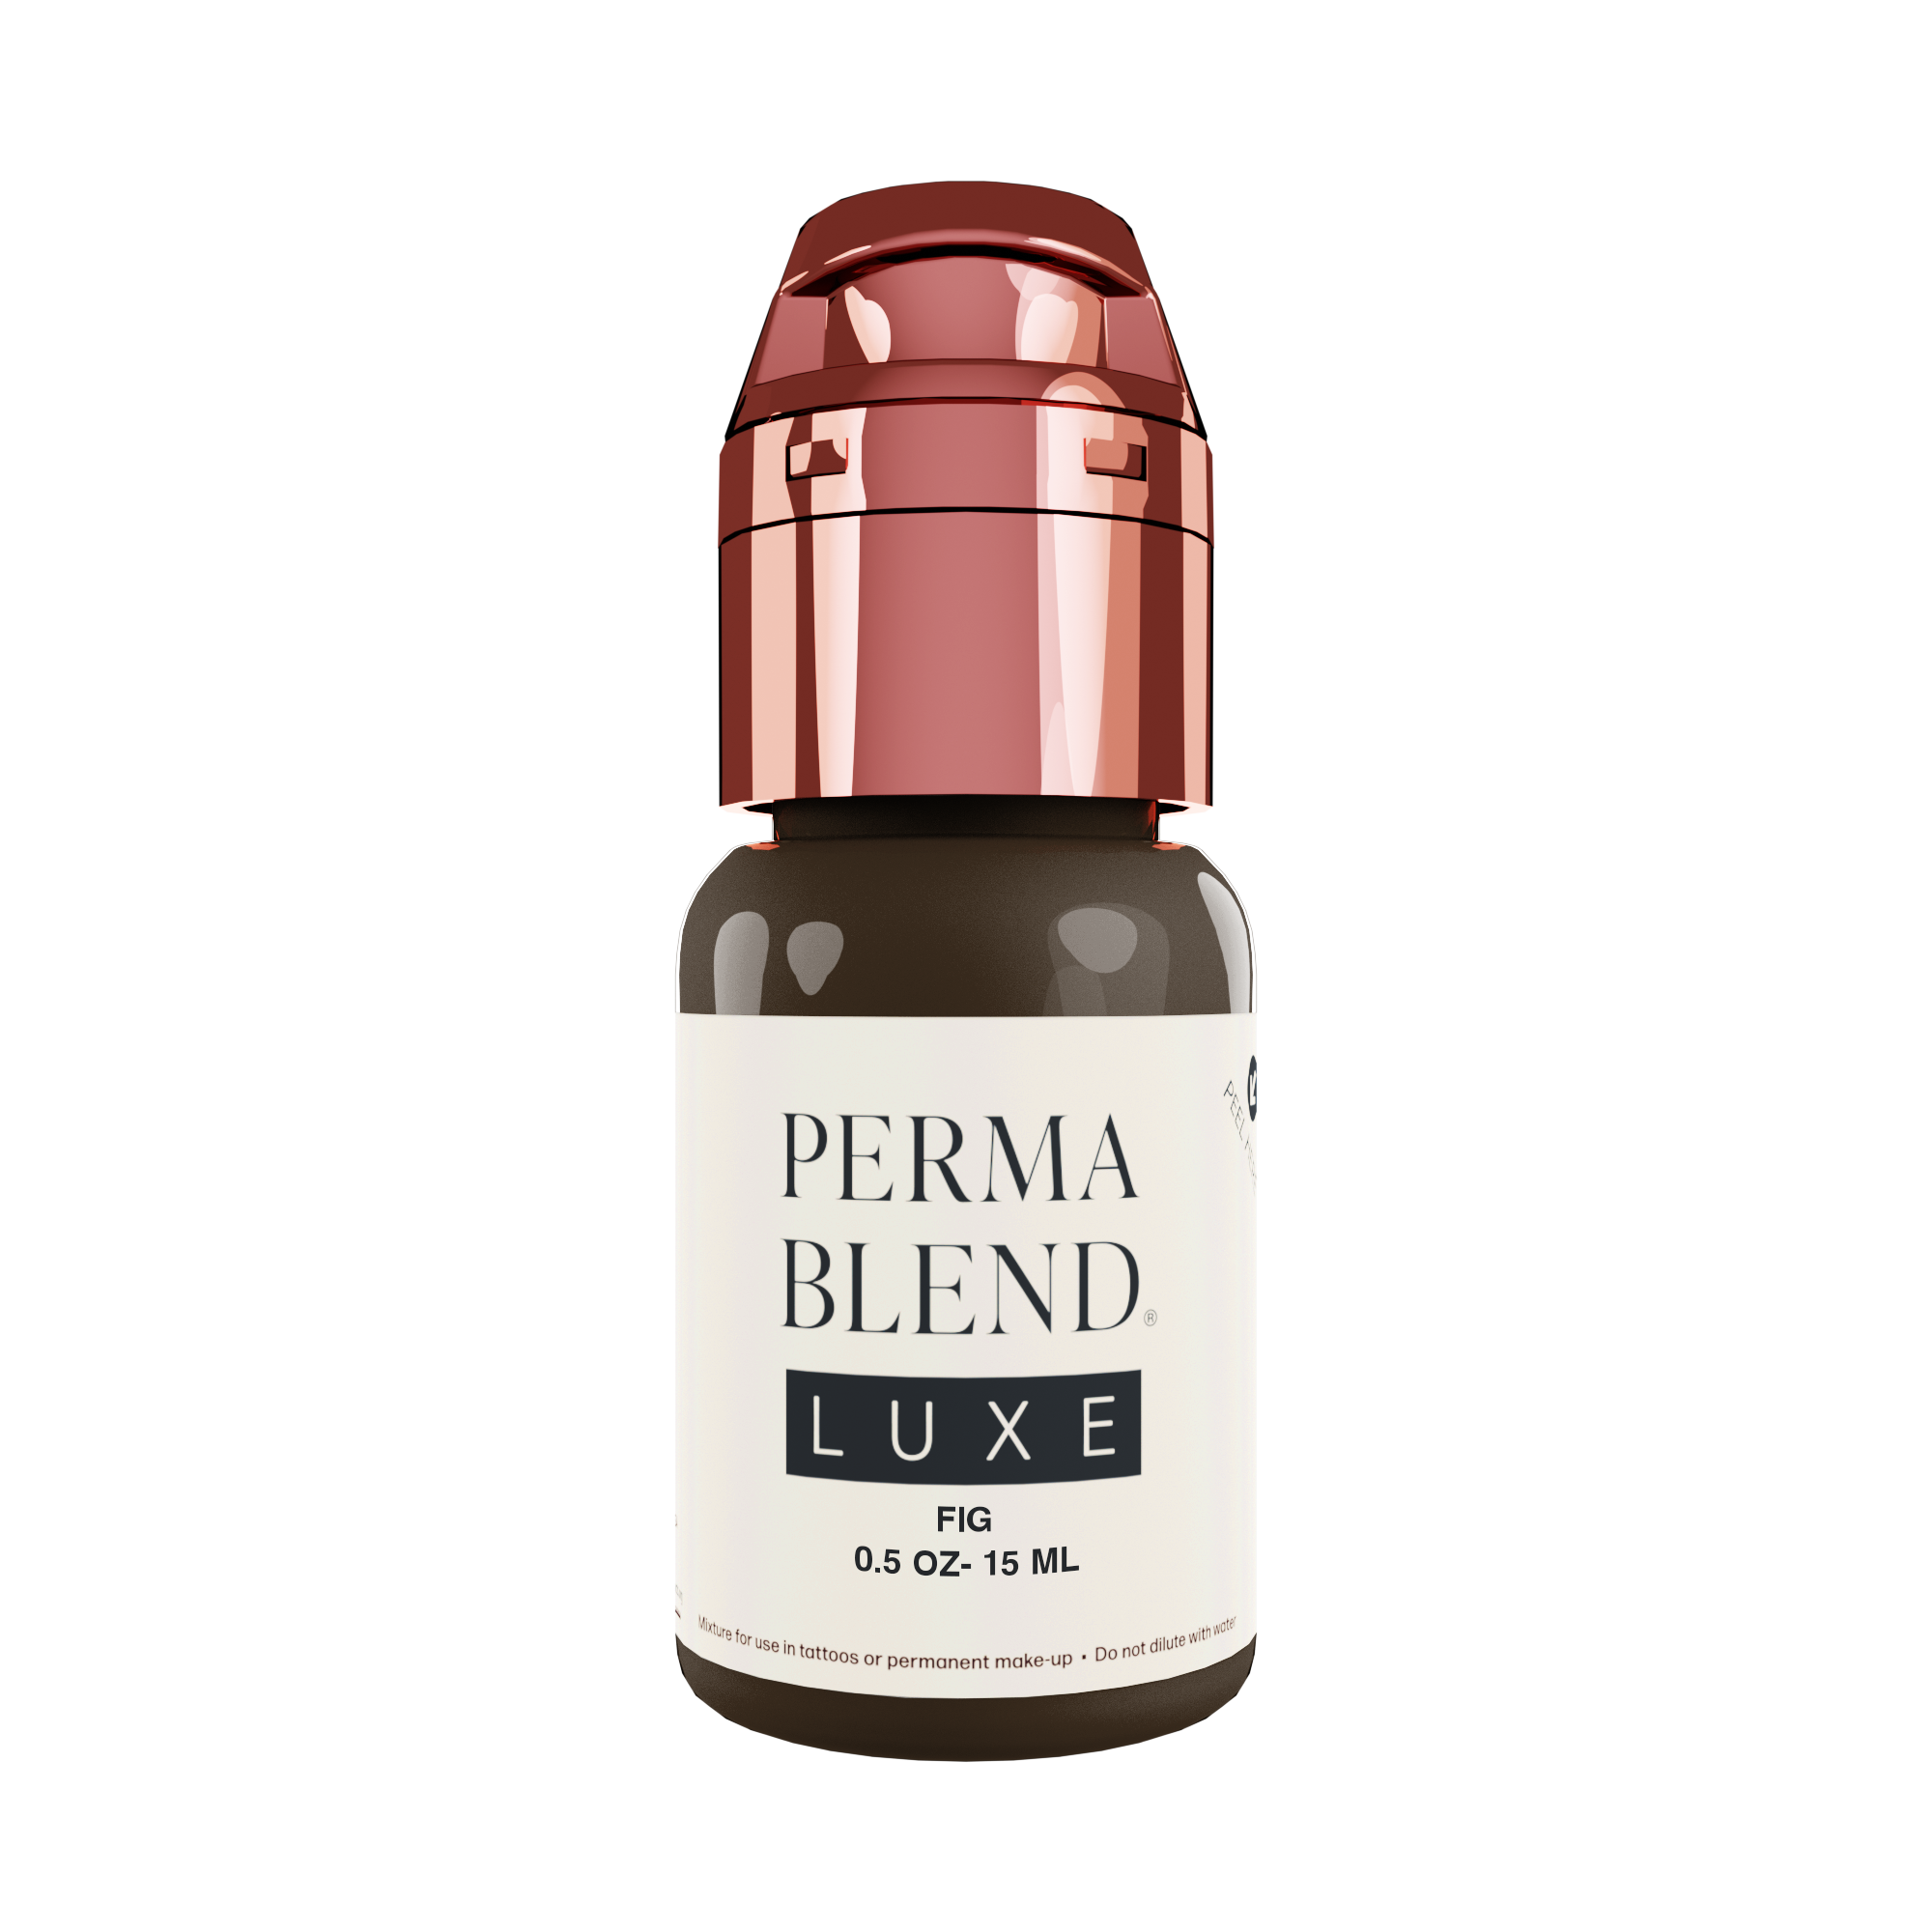 Perma Blend Luxe - FIG - eyebrow pigment 15ml